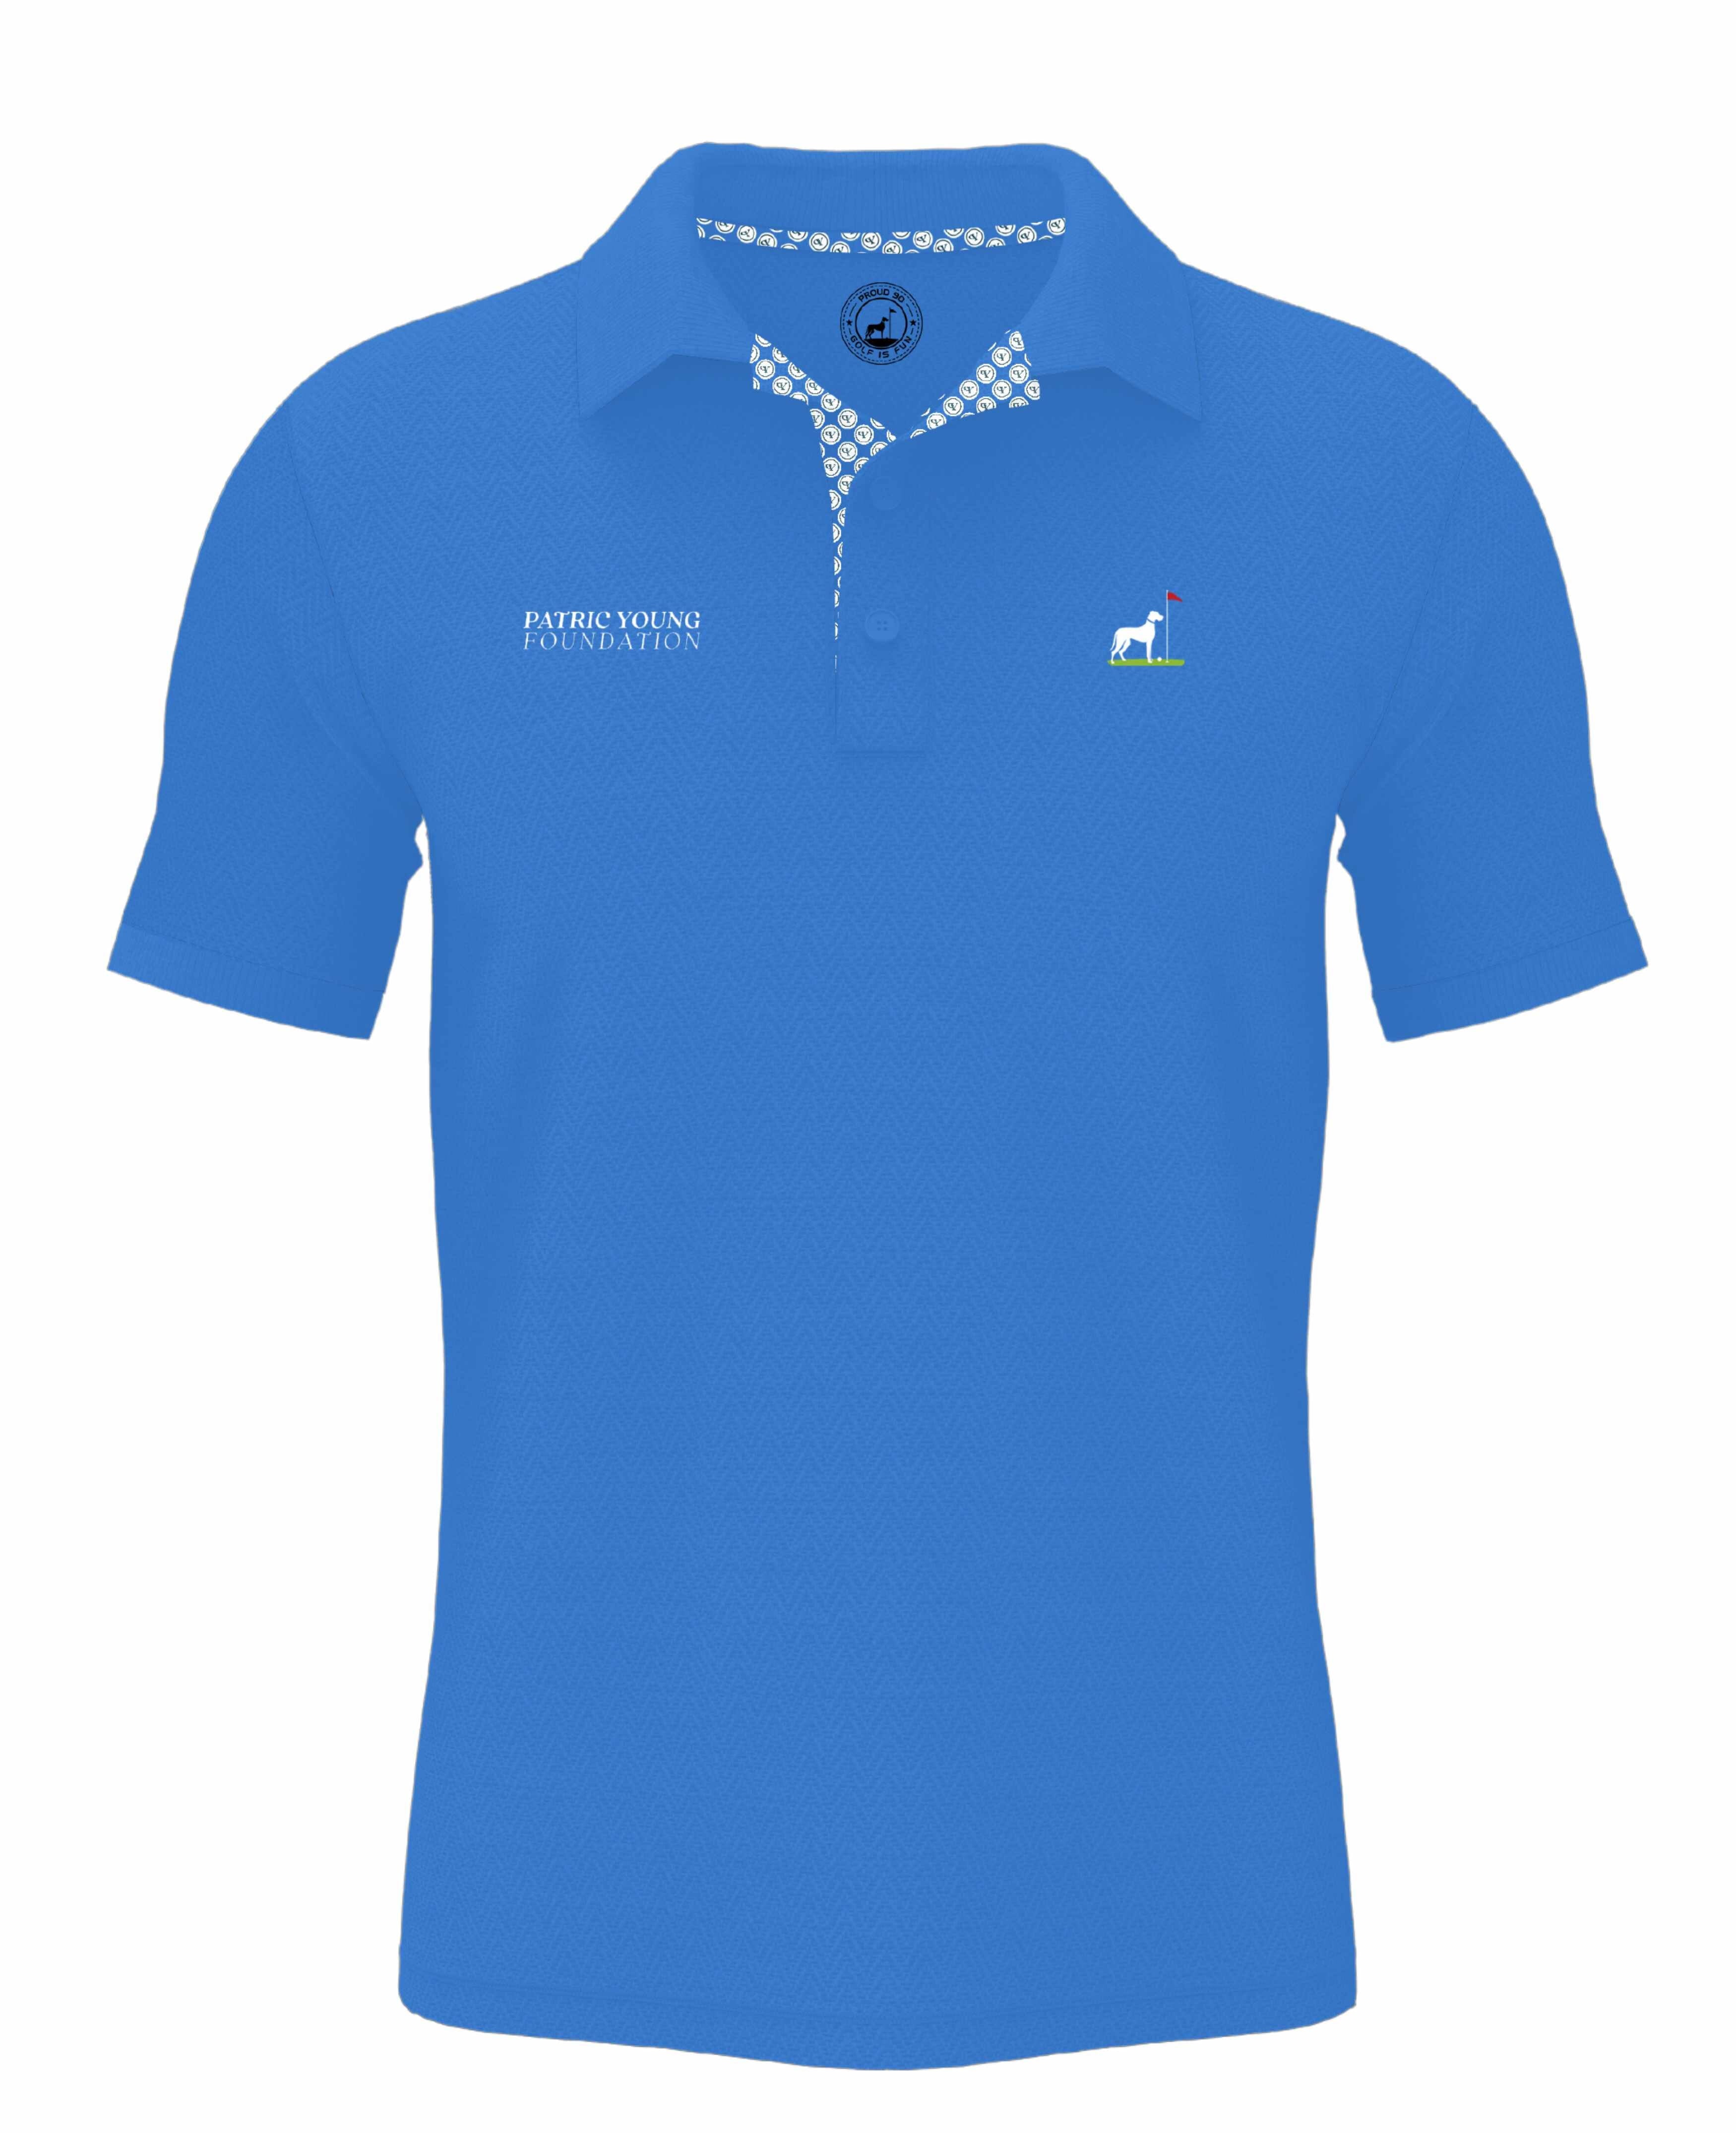 Patric Young Foundation - Limited Edition Charity Polo Men's Forever Collection Proud 90 